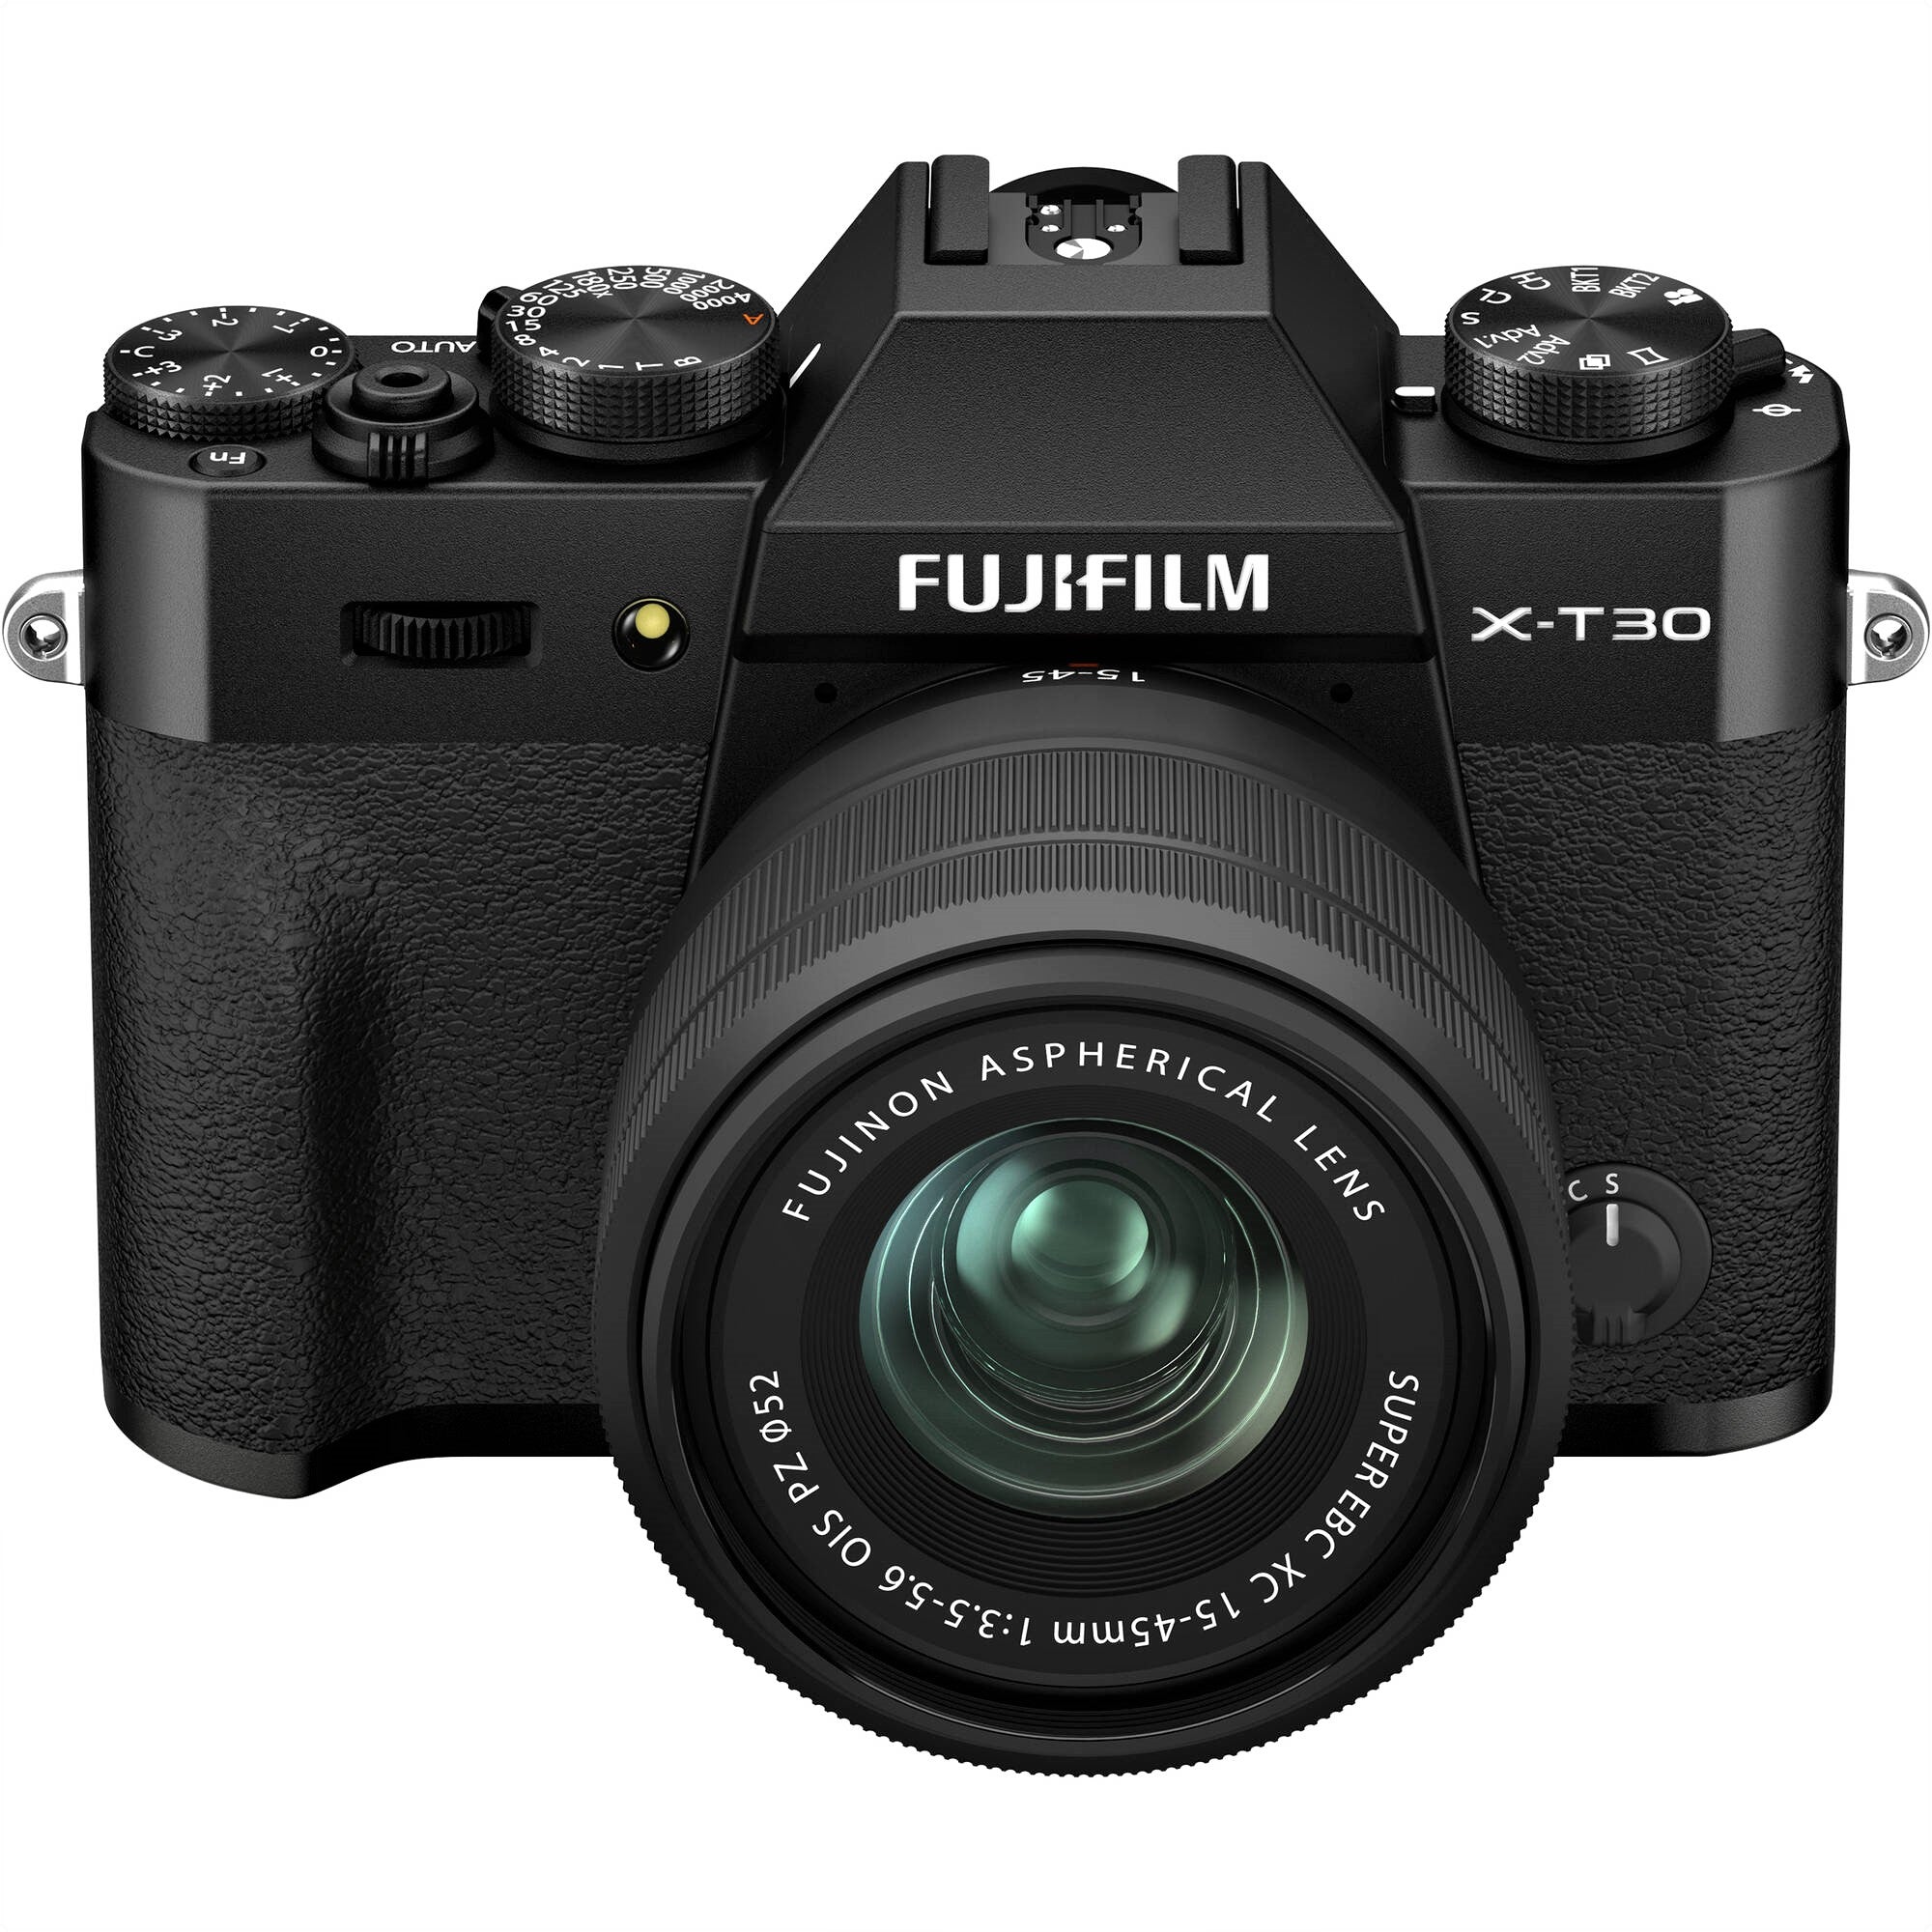 Fujifilm X-T30 II Mirrorless Camera with XC 15-45mm OIS PZ Lens (Black) - Front view